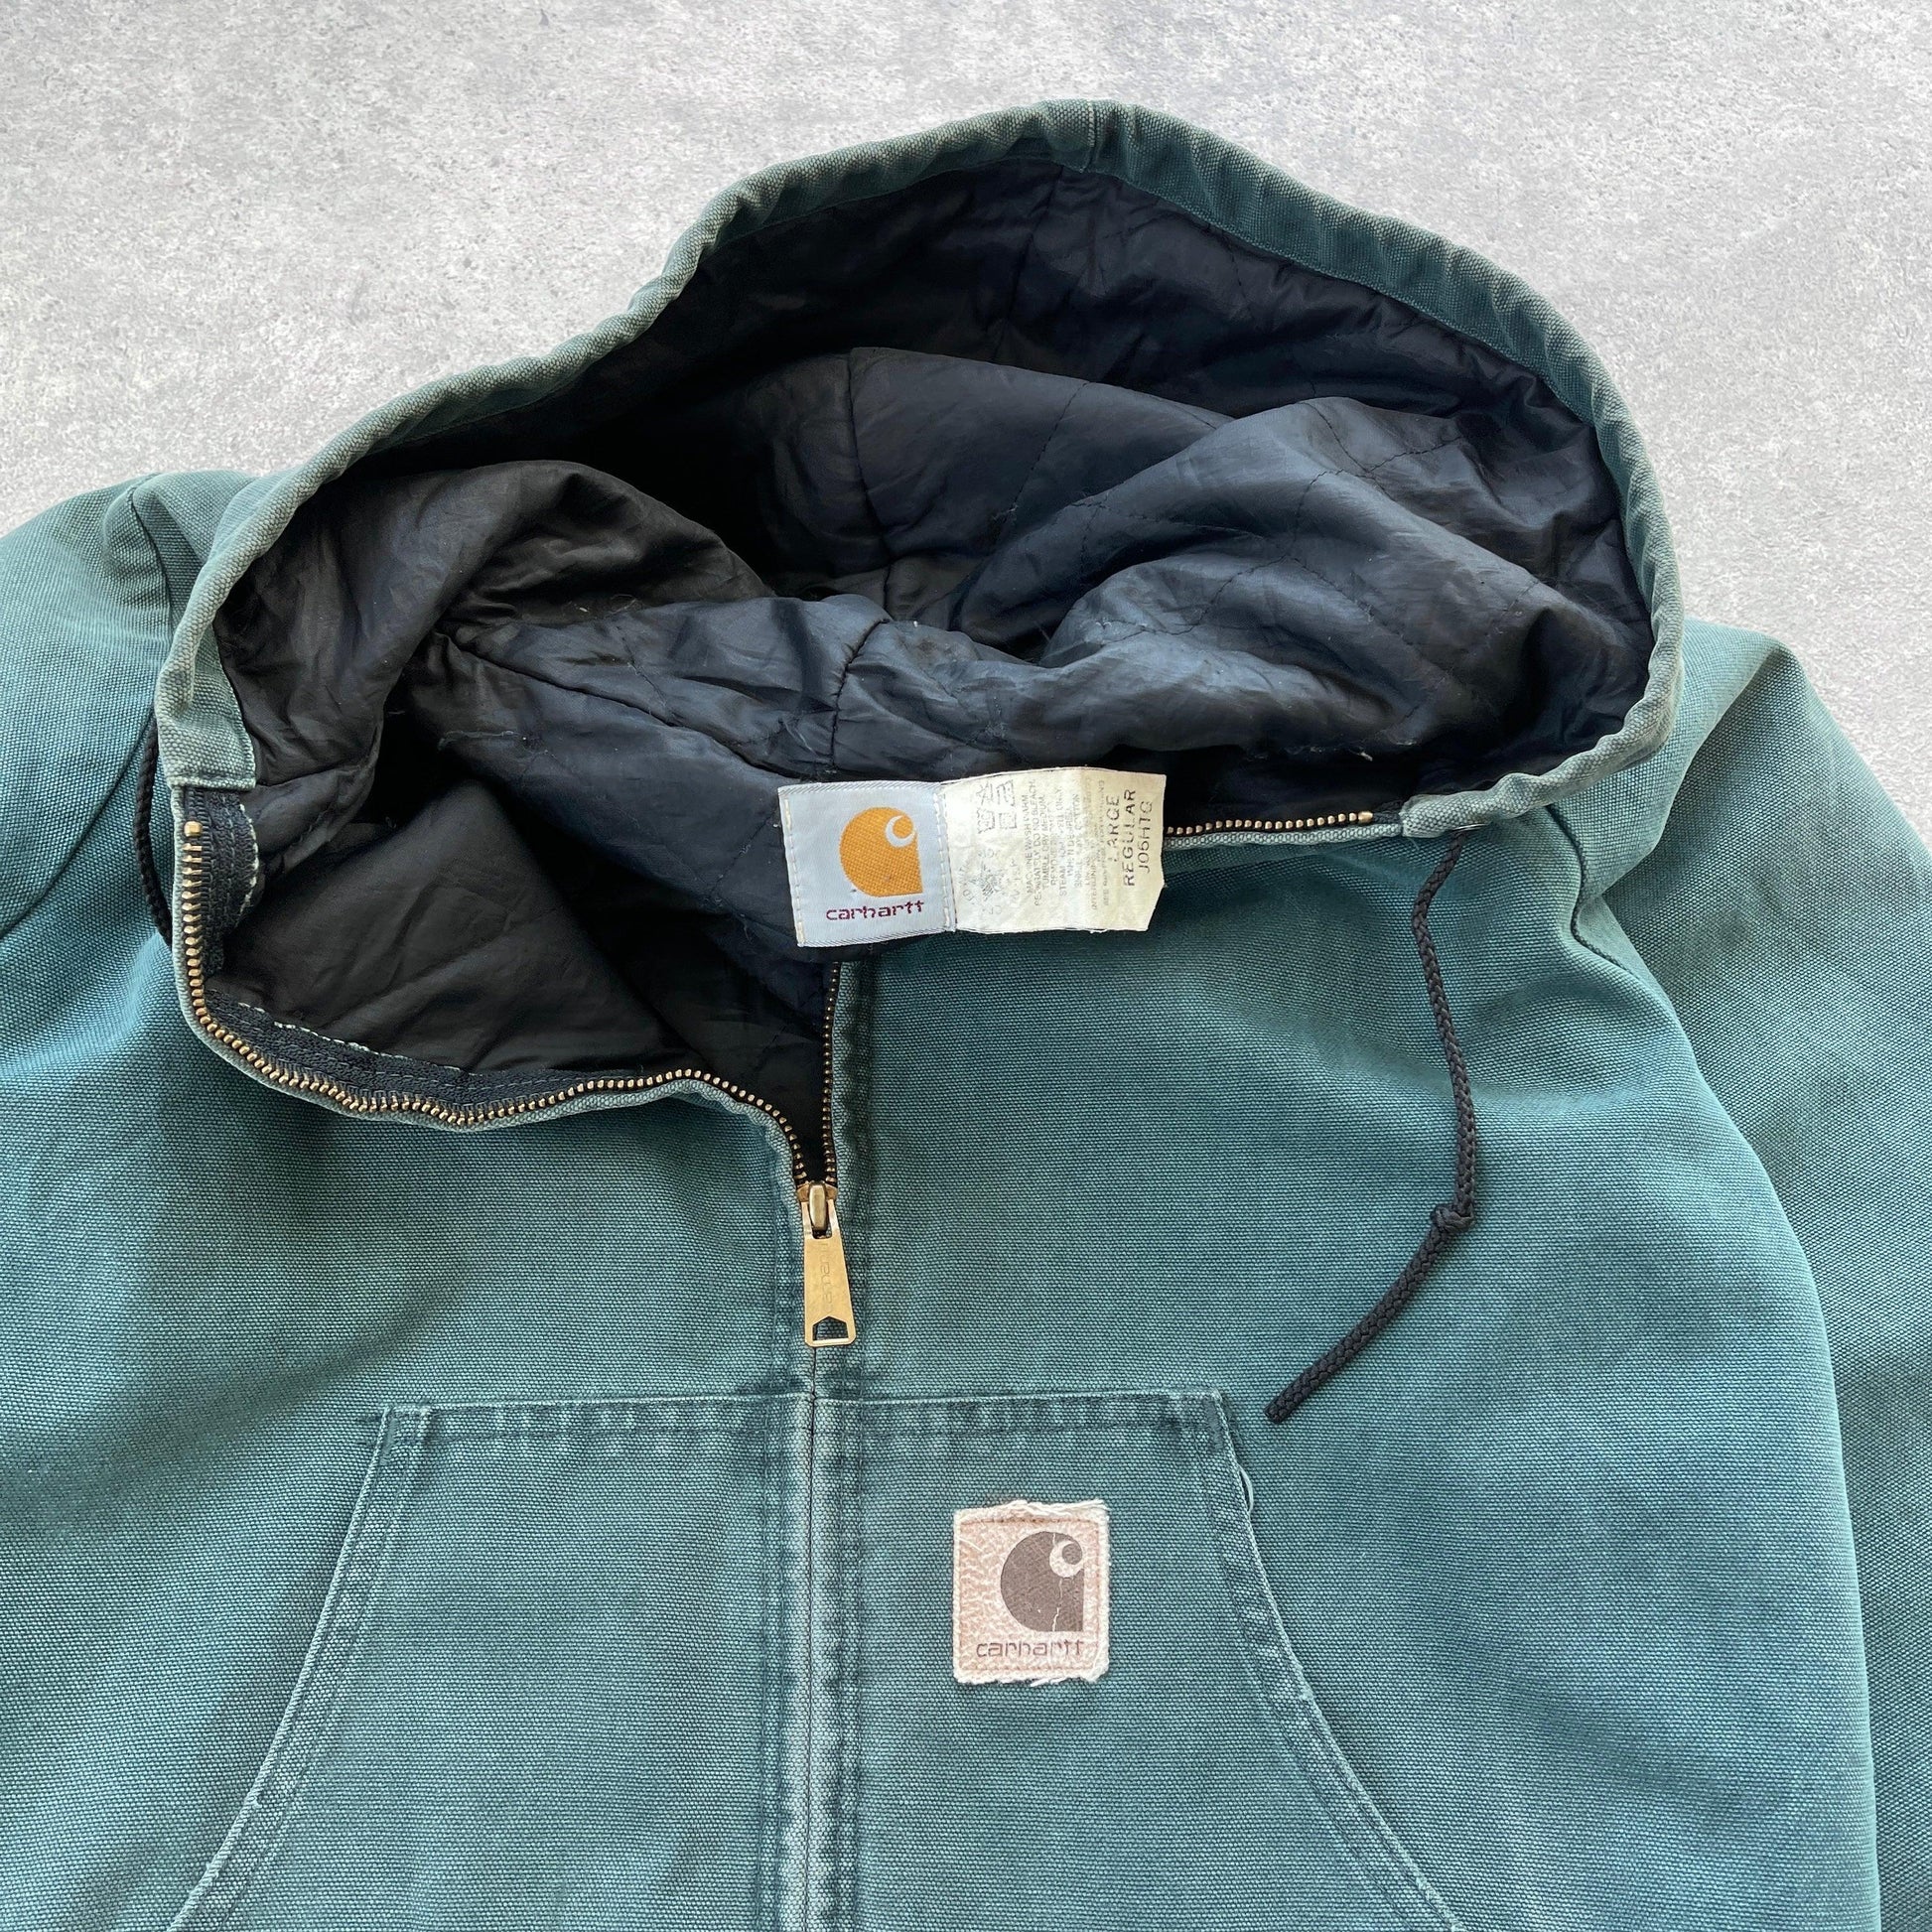 Carhartt 1998 heavyweight active hooded jacket (L) - Known Source